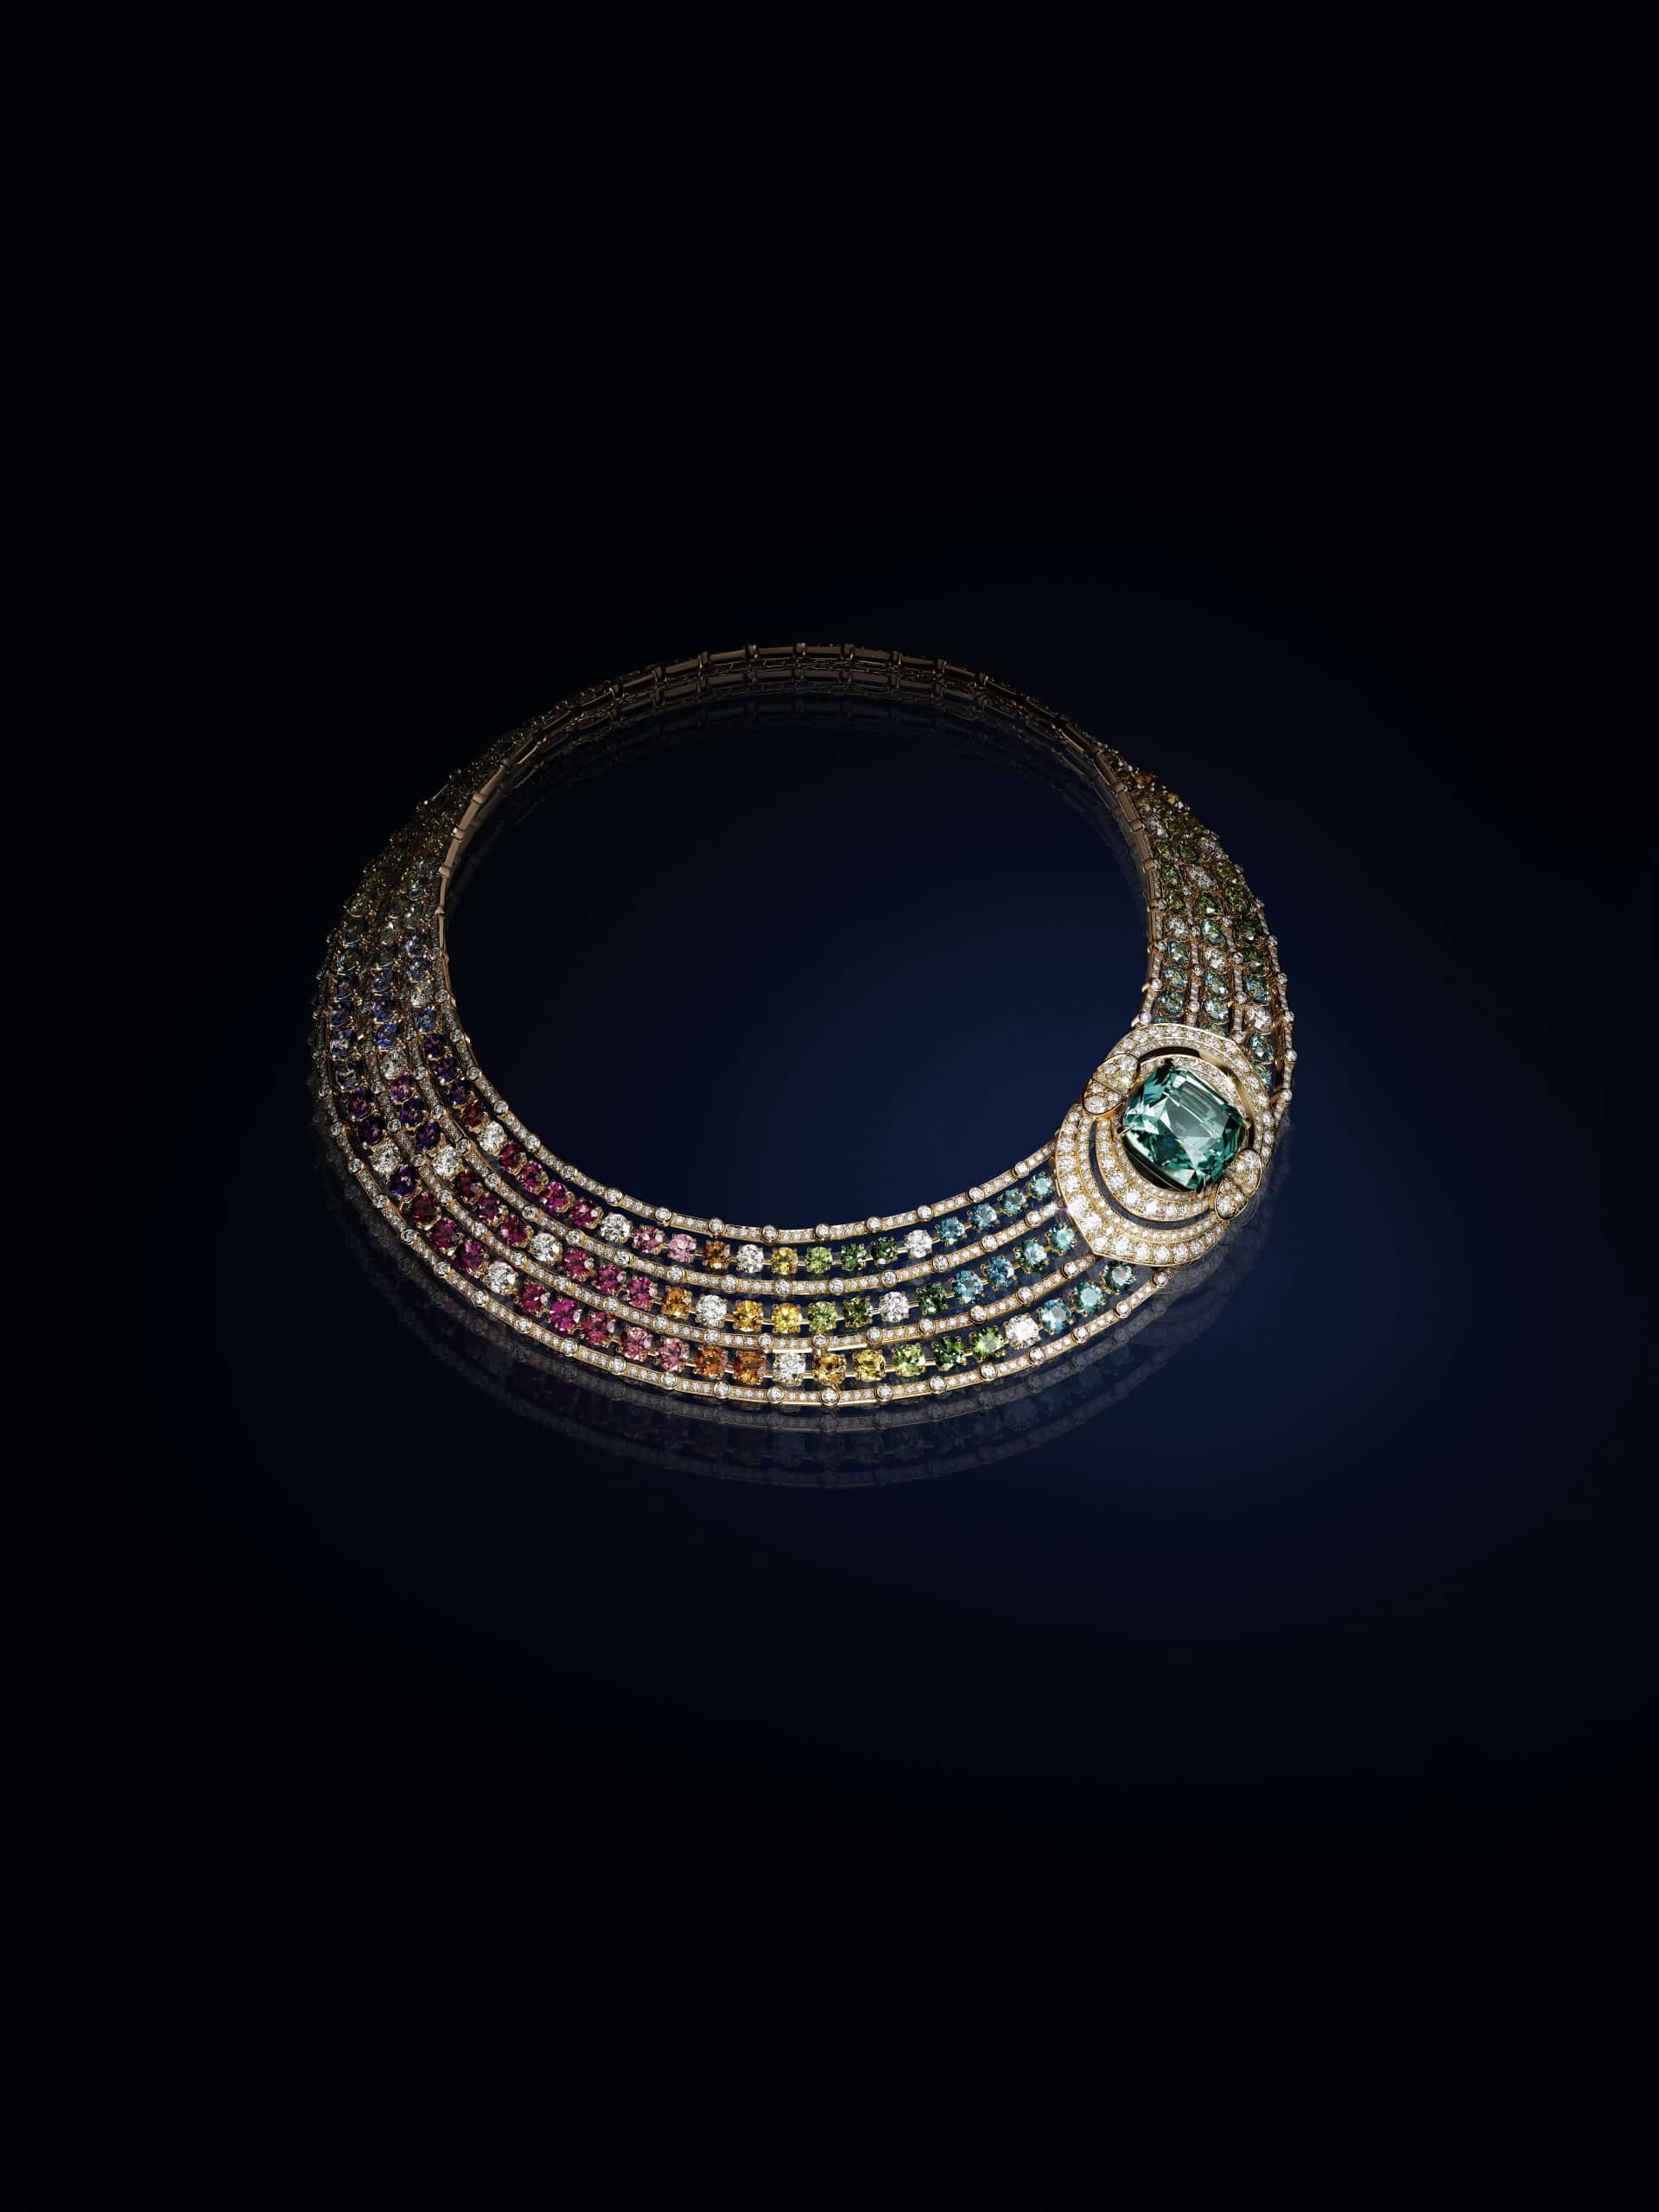 Paris : Louis Vuitton and Chopard present their new Haute Joaillerie  collection